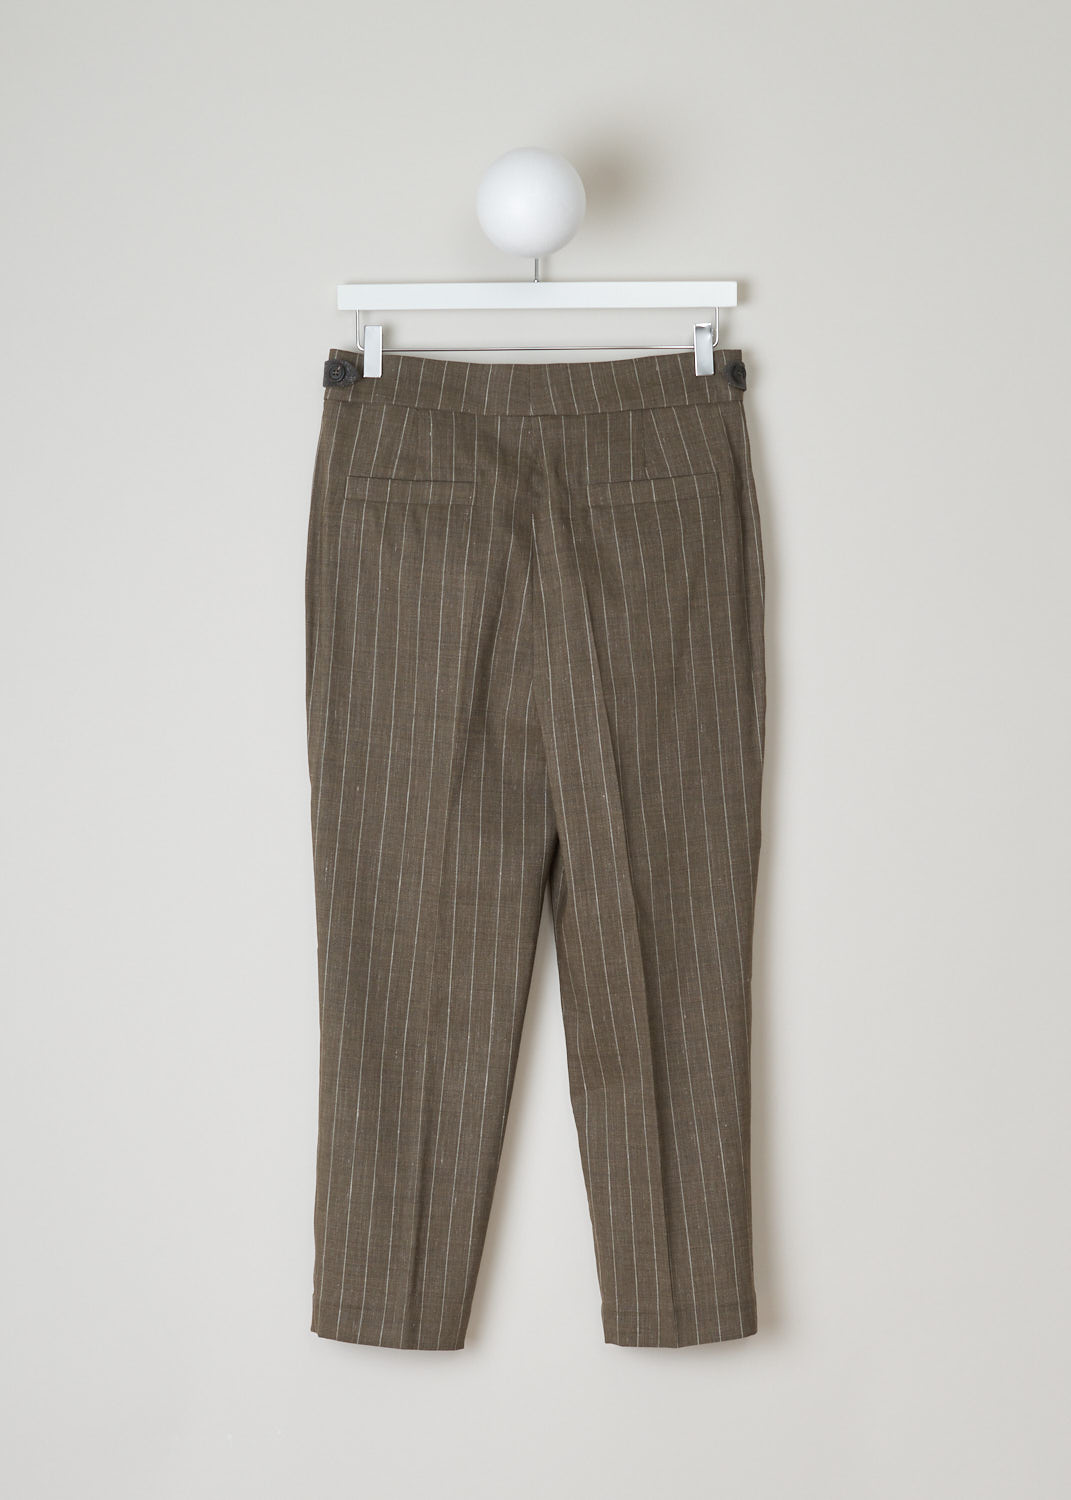 Brunello Cucinelli, Khaki pinstripe pants, MF554P6492_C005, green white, back, Khaki pinstripe pants, comes without belt loops, but with monili fasteners. Made with a single pleat and forward slanted pockets. On the back it has welt pockets. Comes with a cropped length. As fastening option this model has a zipper, an metal clip and a backing button. 